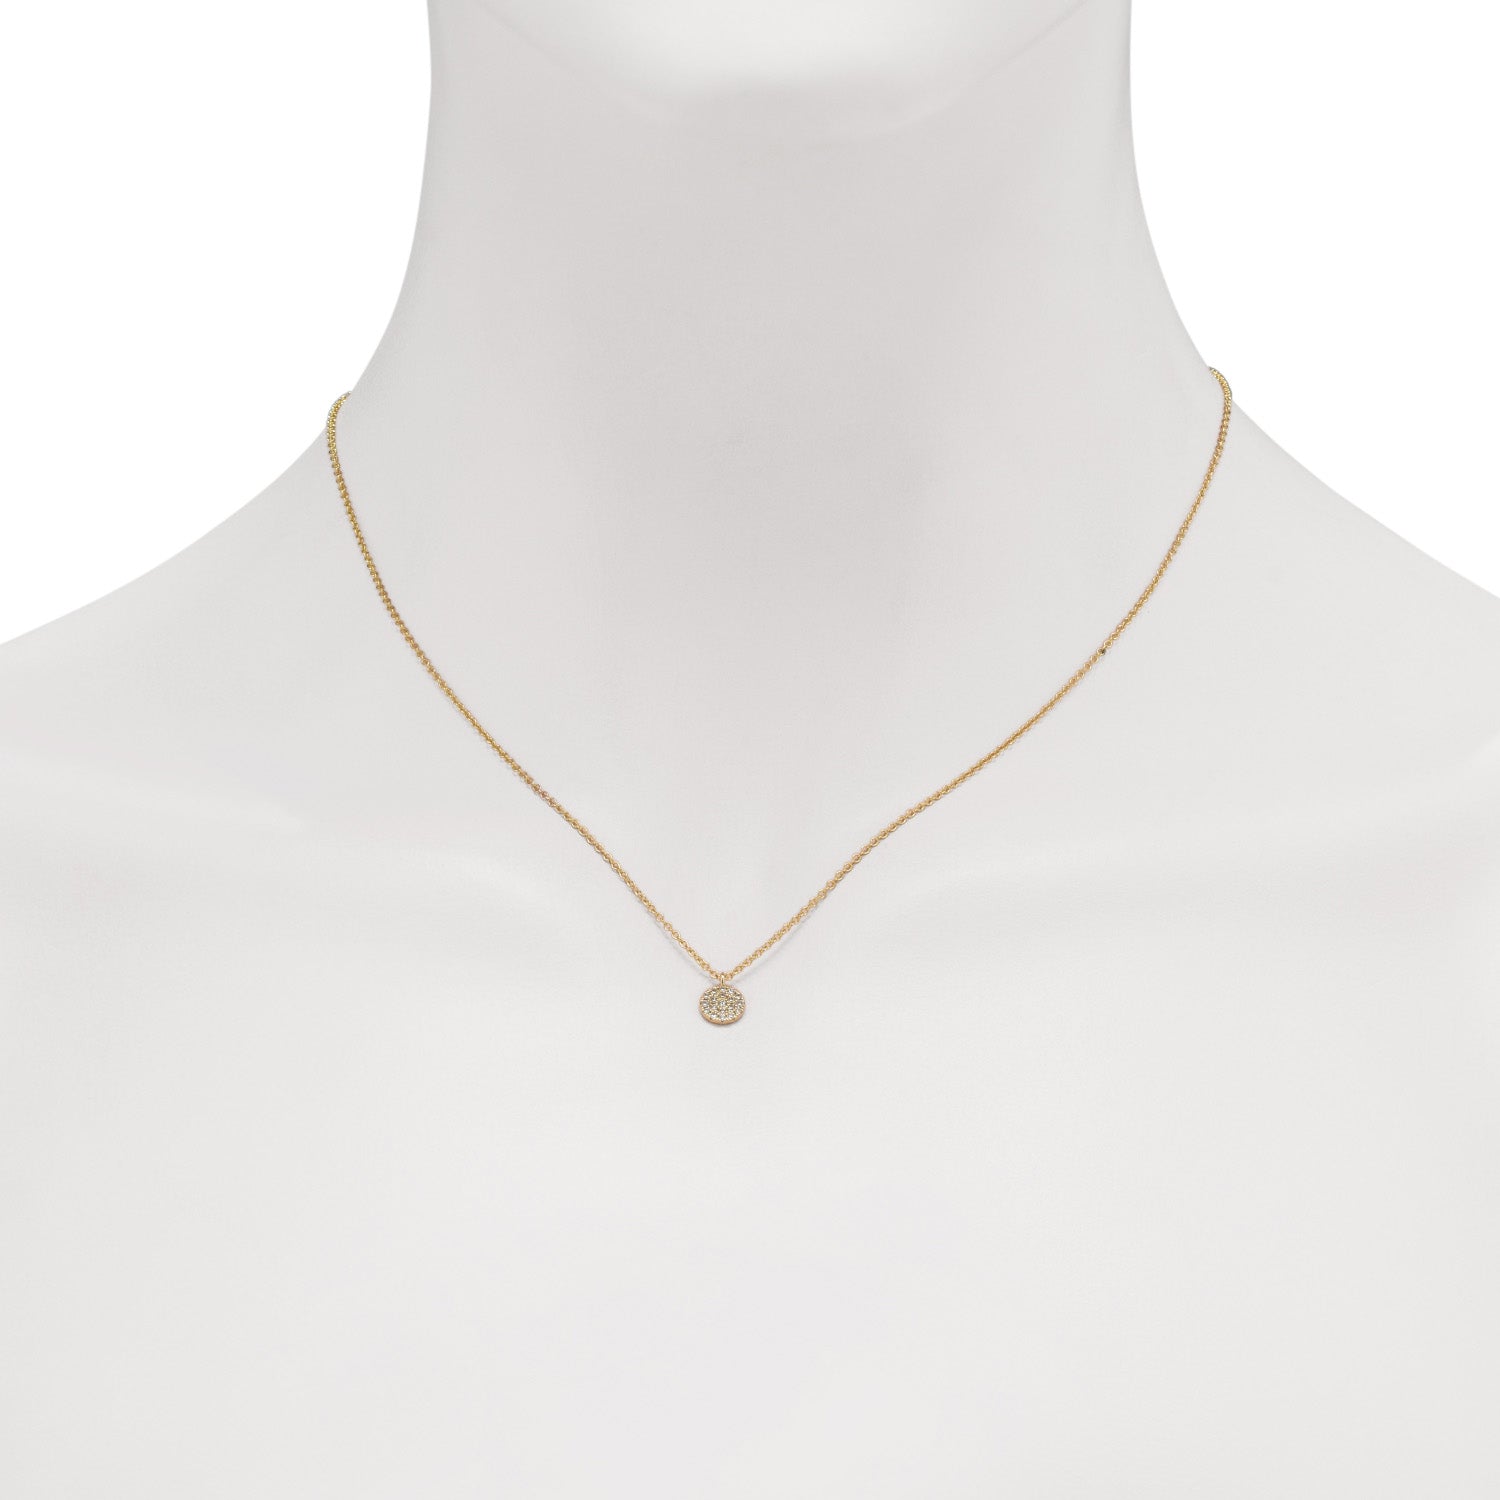 Gabriel Diamond Pave Disc Necklace in 14kt Yellow Gold (1/10ct tw)